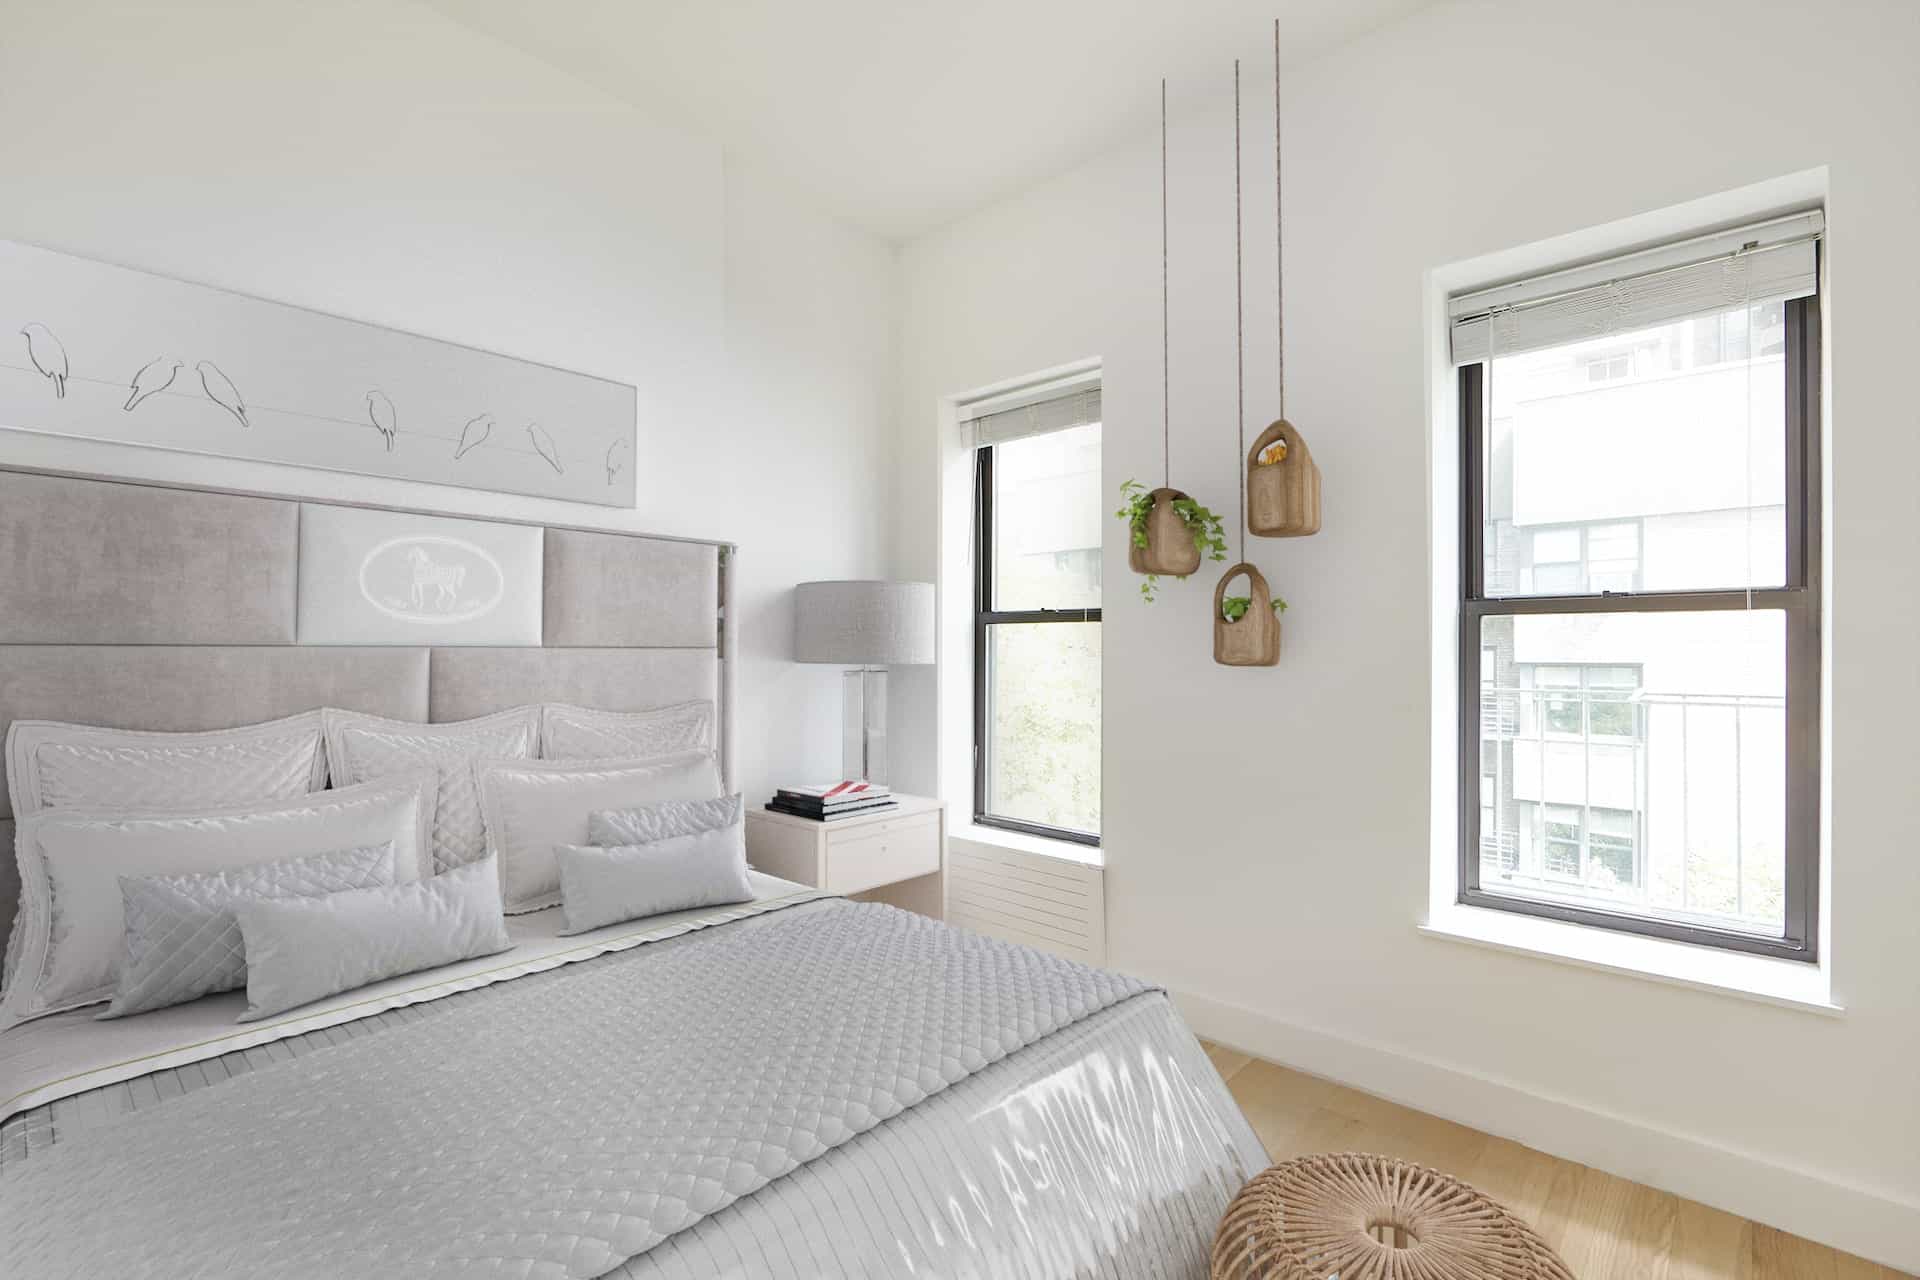 Bedroom at 244 East 46th Street apartments with a king-sized bed, oversized headboard, two windows and hardwood floors.